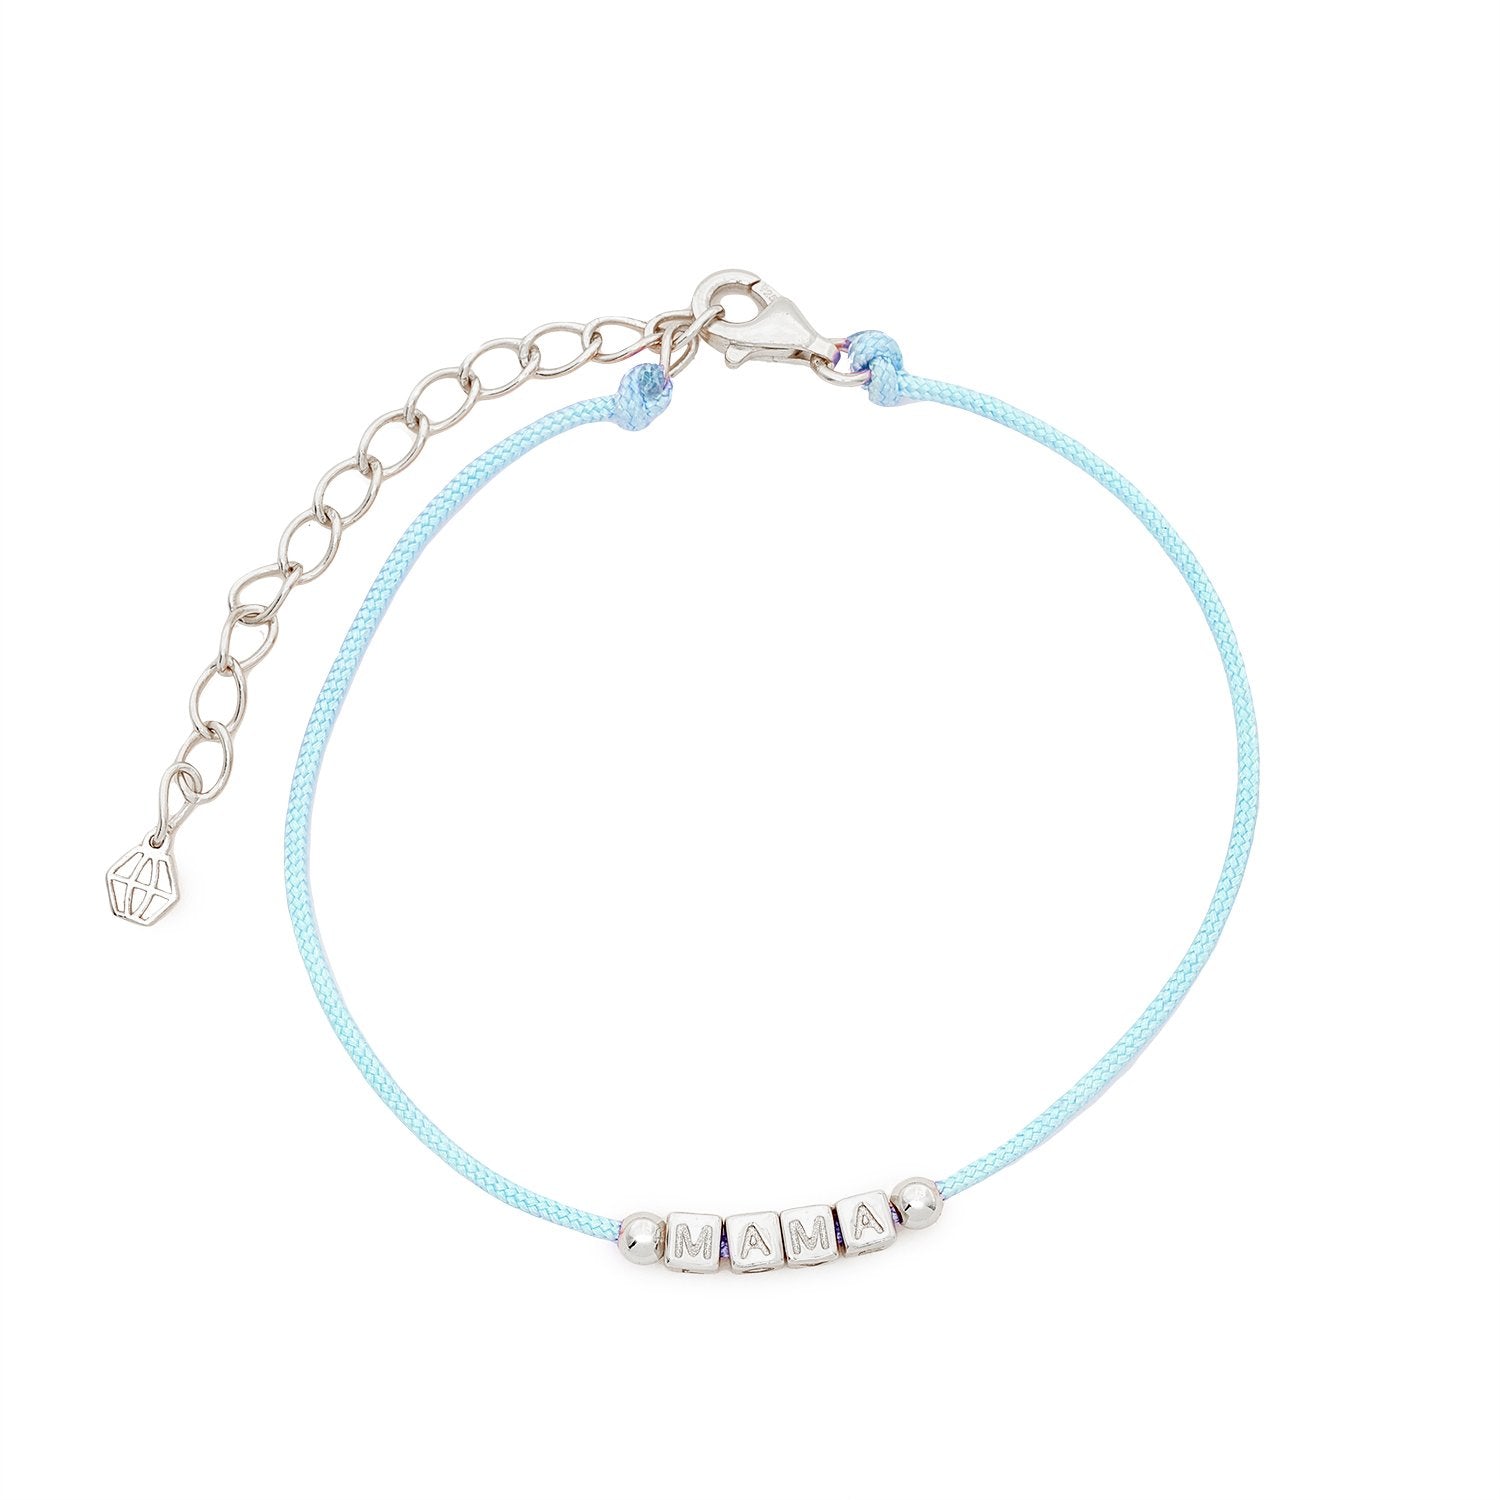 Little Words Project Refined Collection - Mama Light Blue Cord Bracelet